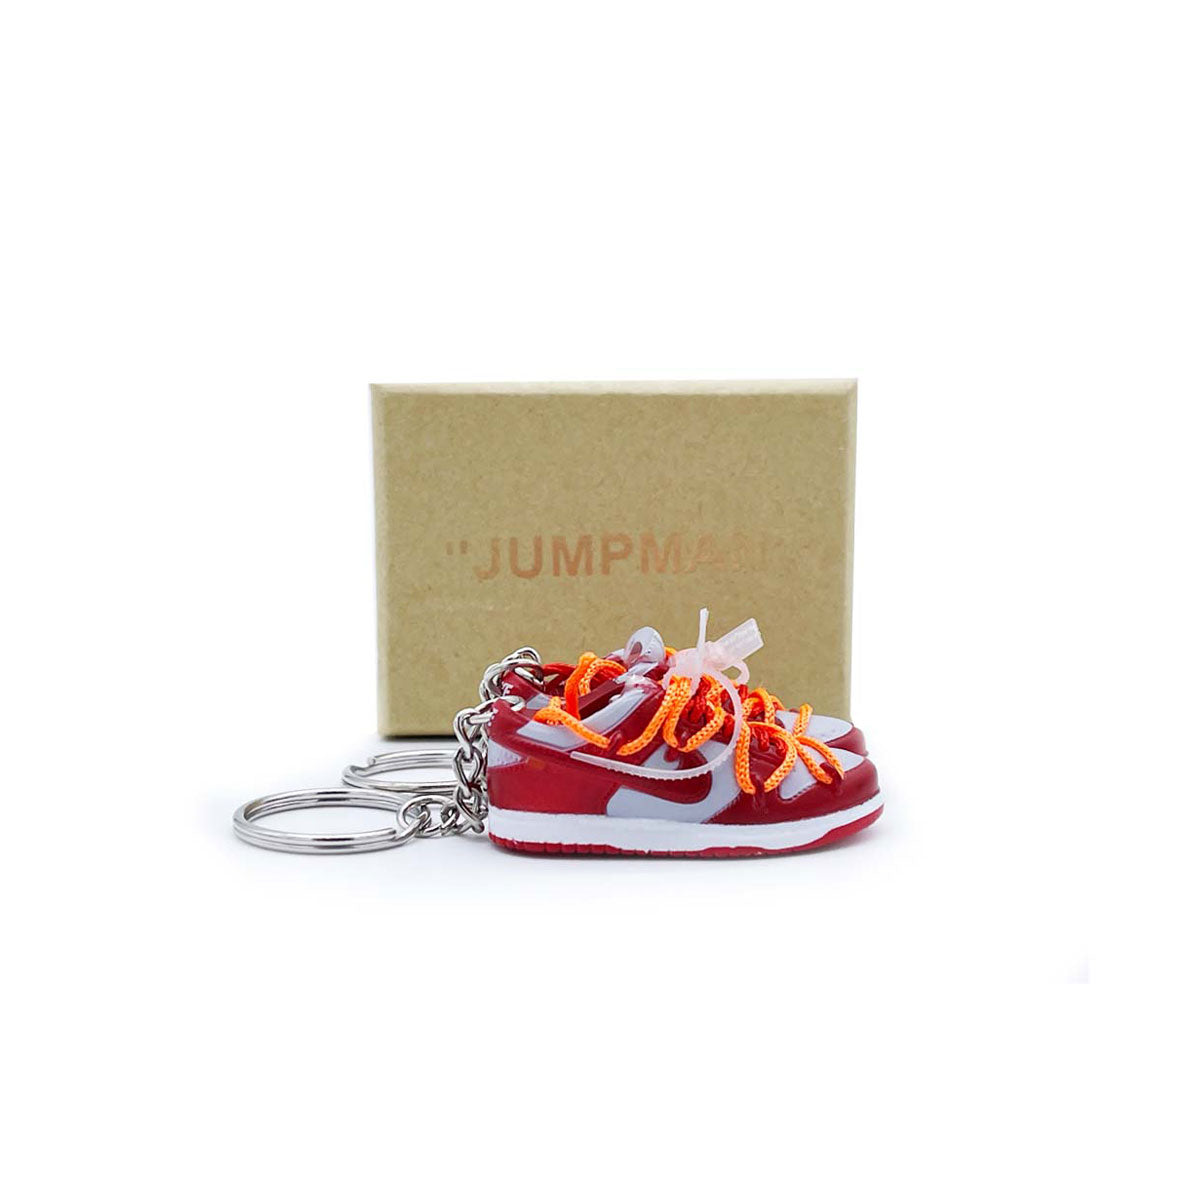 3D Sneaker Keychain- Nike SB Dunk Low Off-White University Red Pair